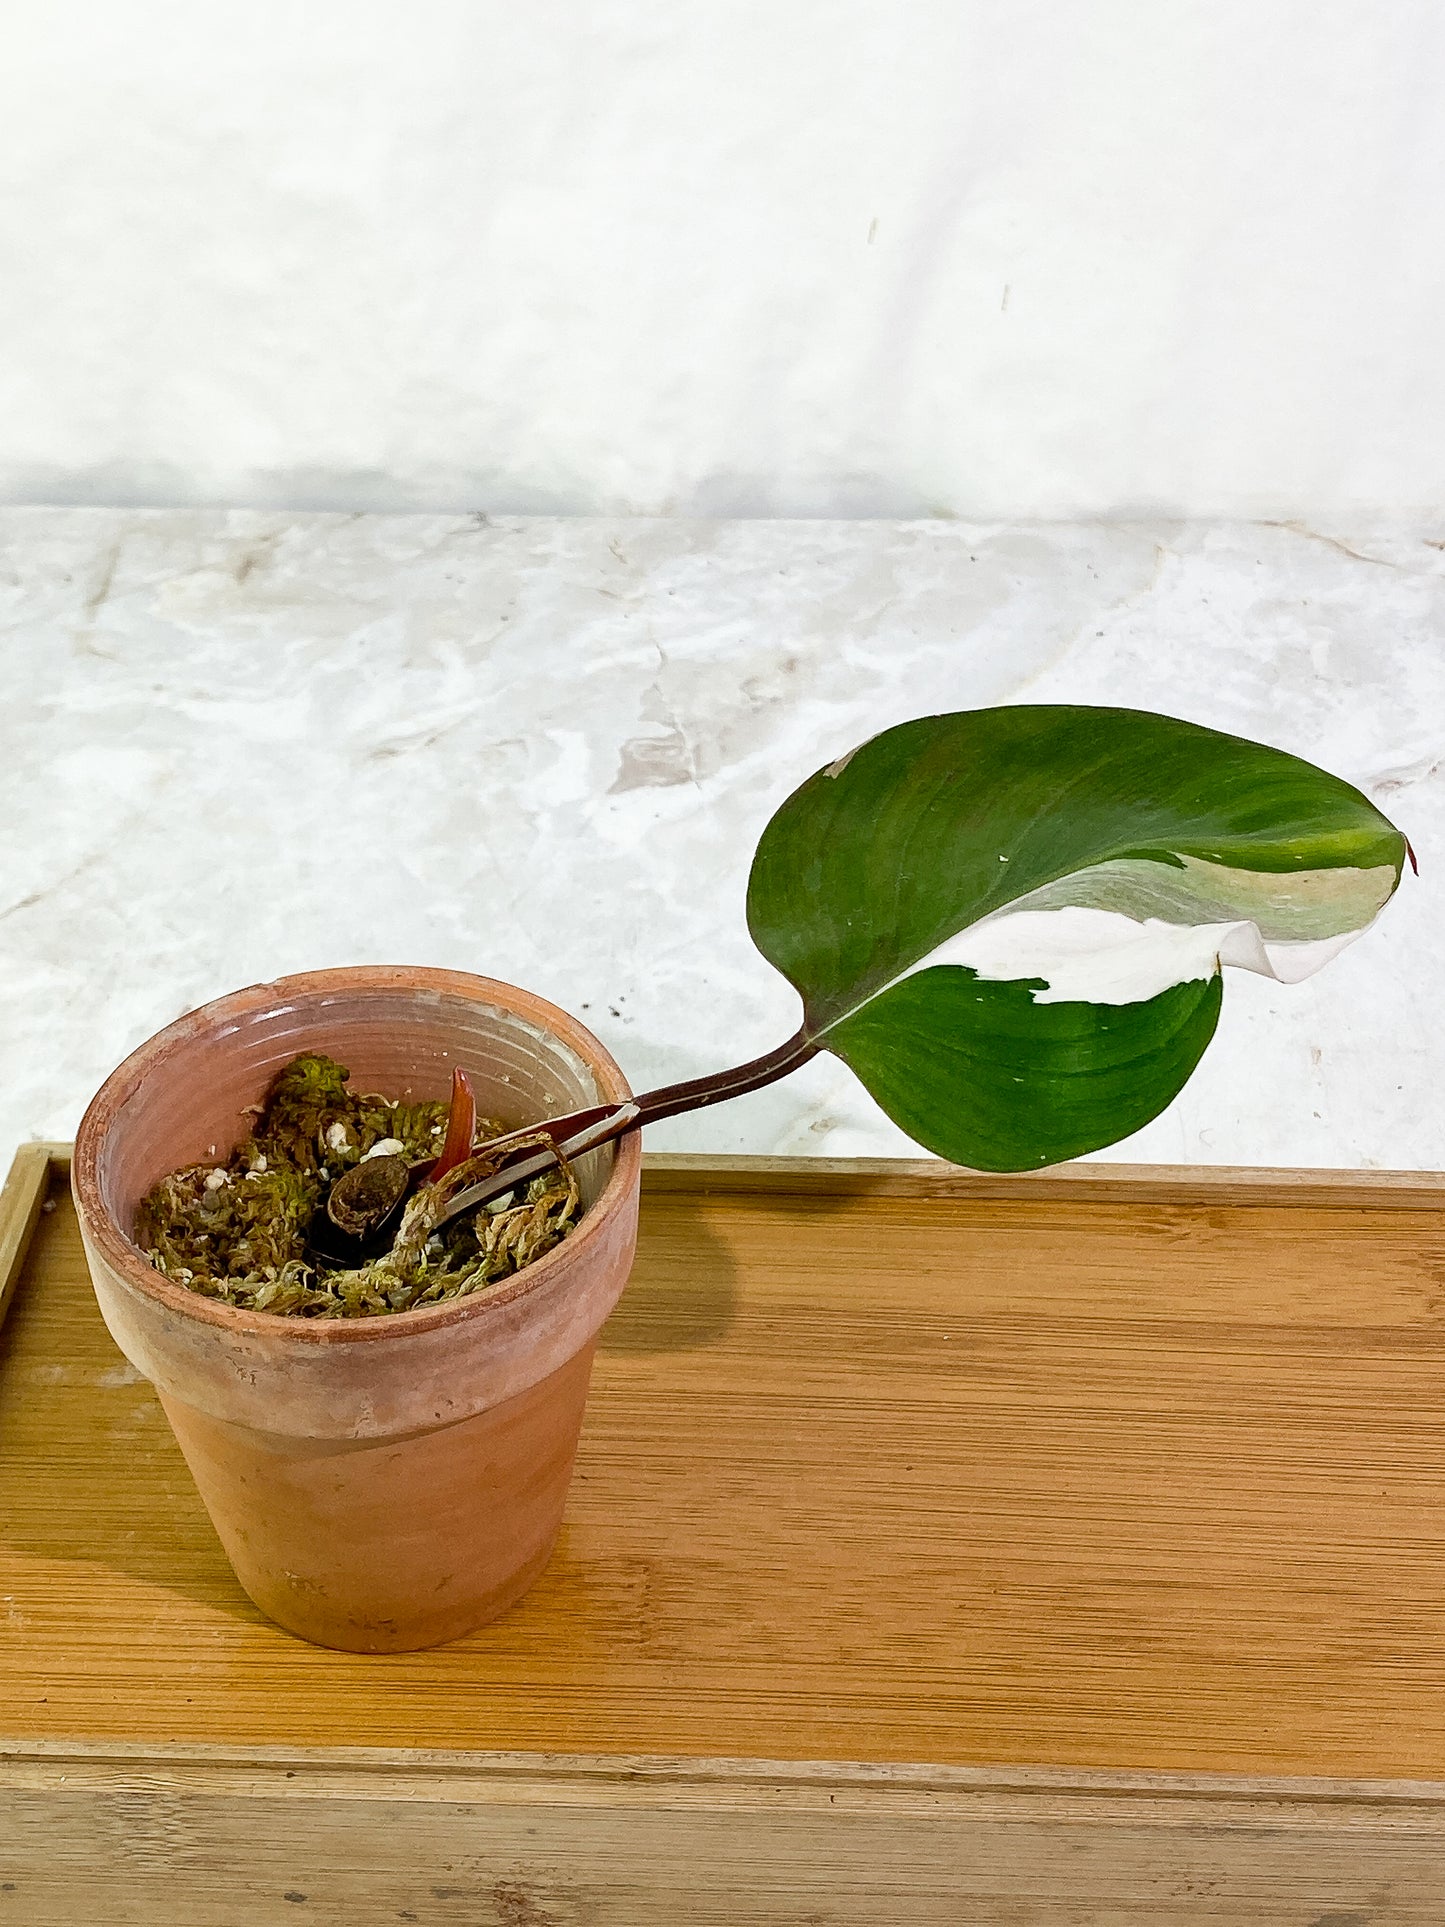 Philodendron White Knight tricolor cutting 1 leaf 1 sprout slightly rooted